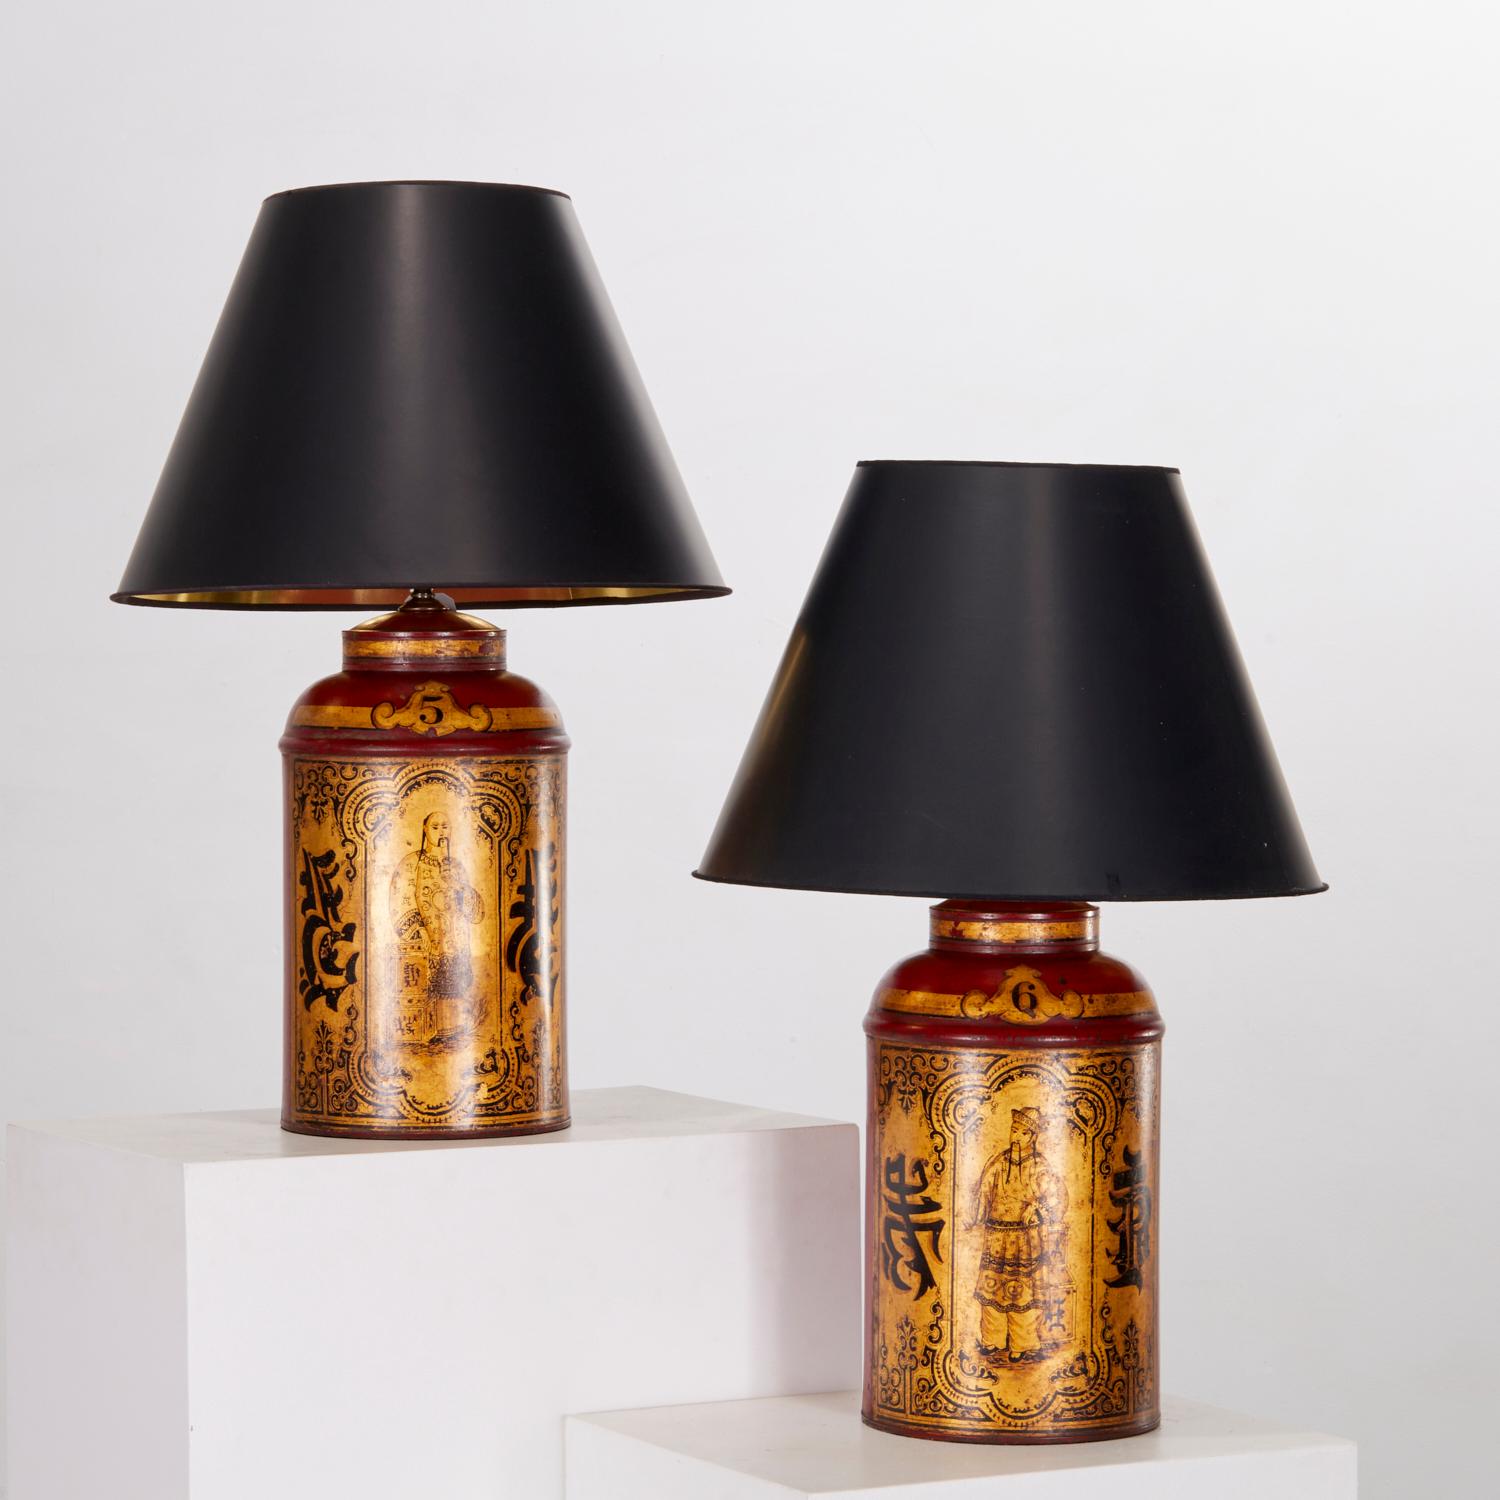 19th Century Victorian Red and Gold Tole Tea Canister Lamps with Black Card Shades - A Pair